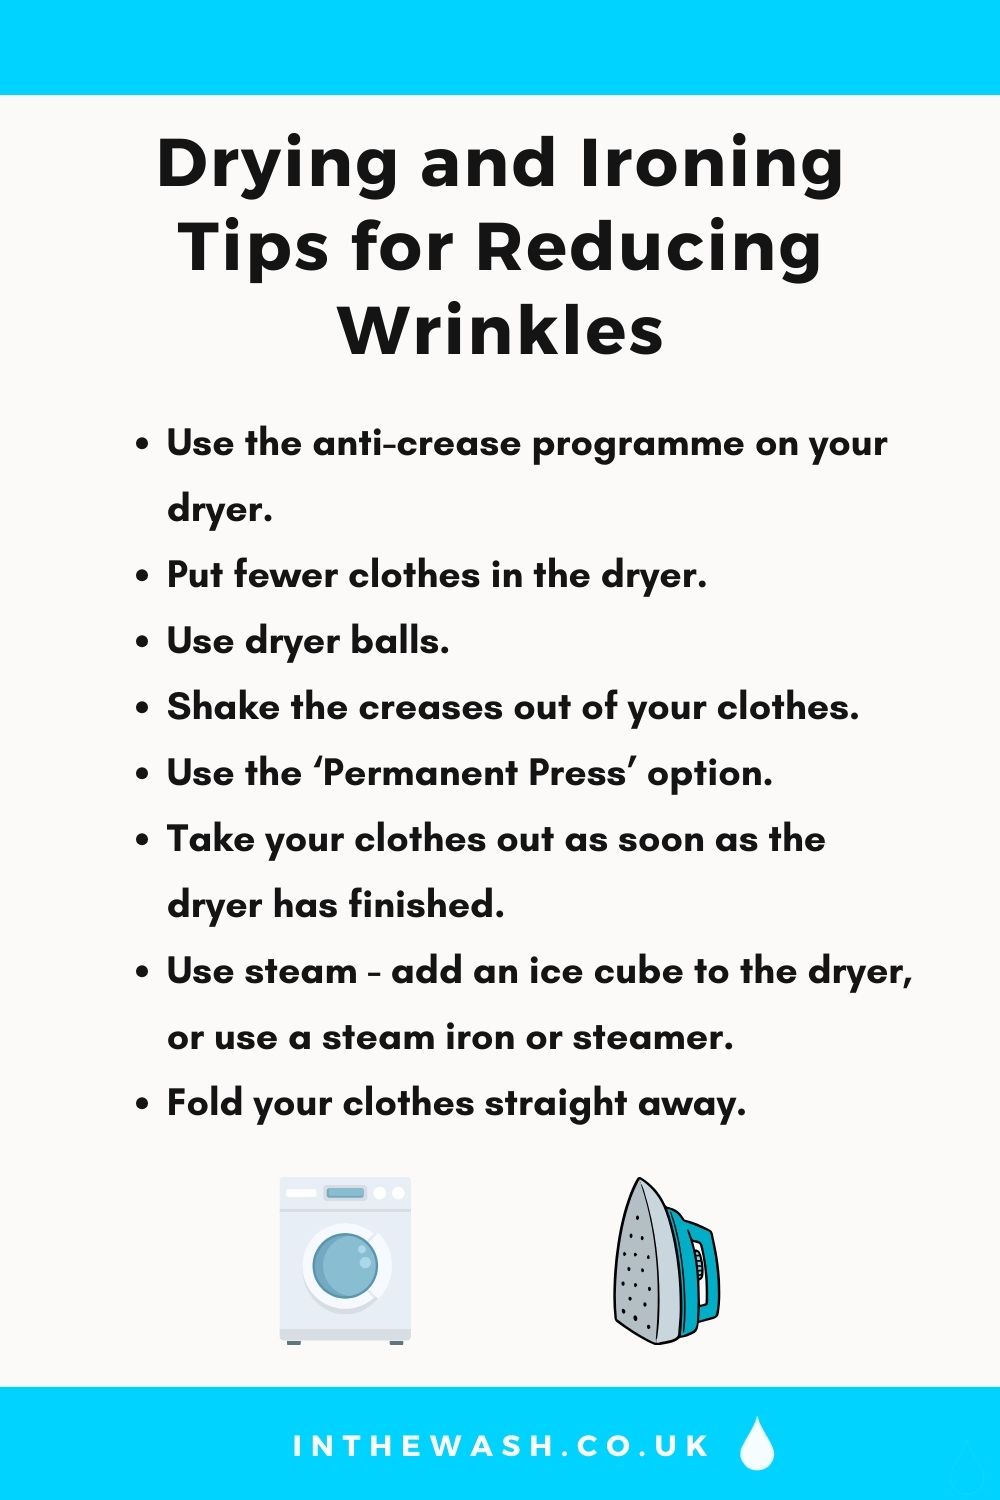 Drying and ironing tips for reducing wrinkles